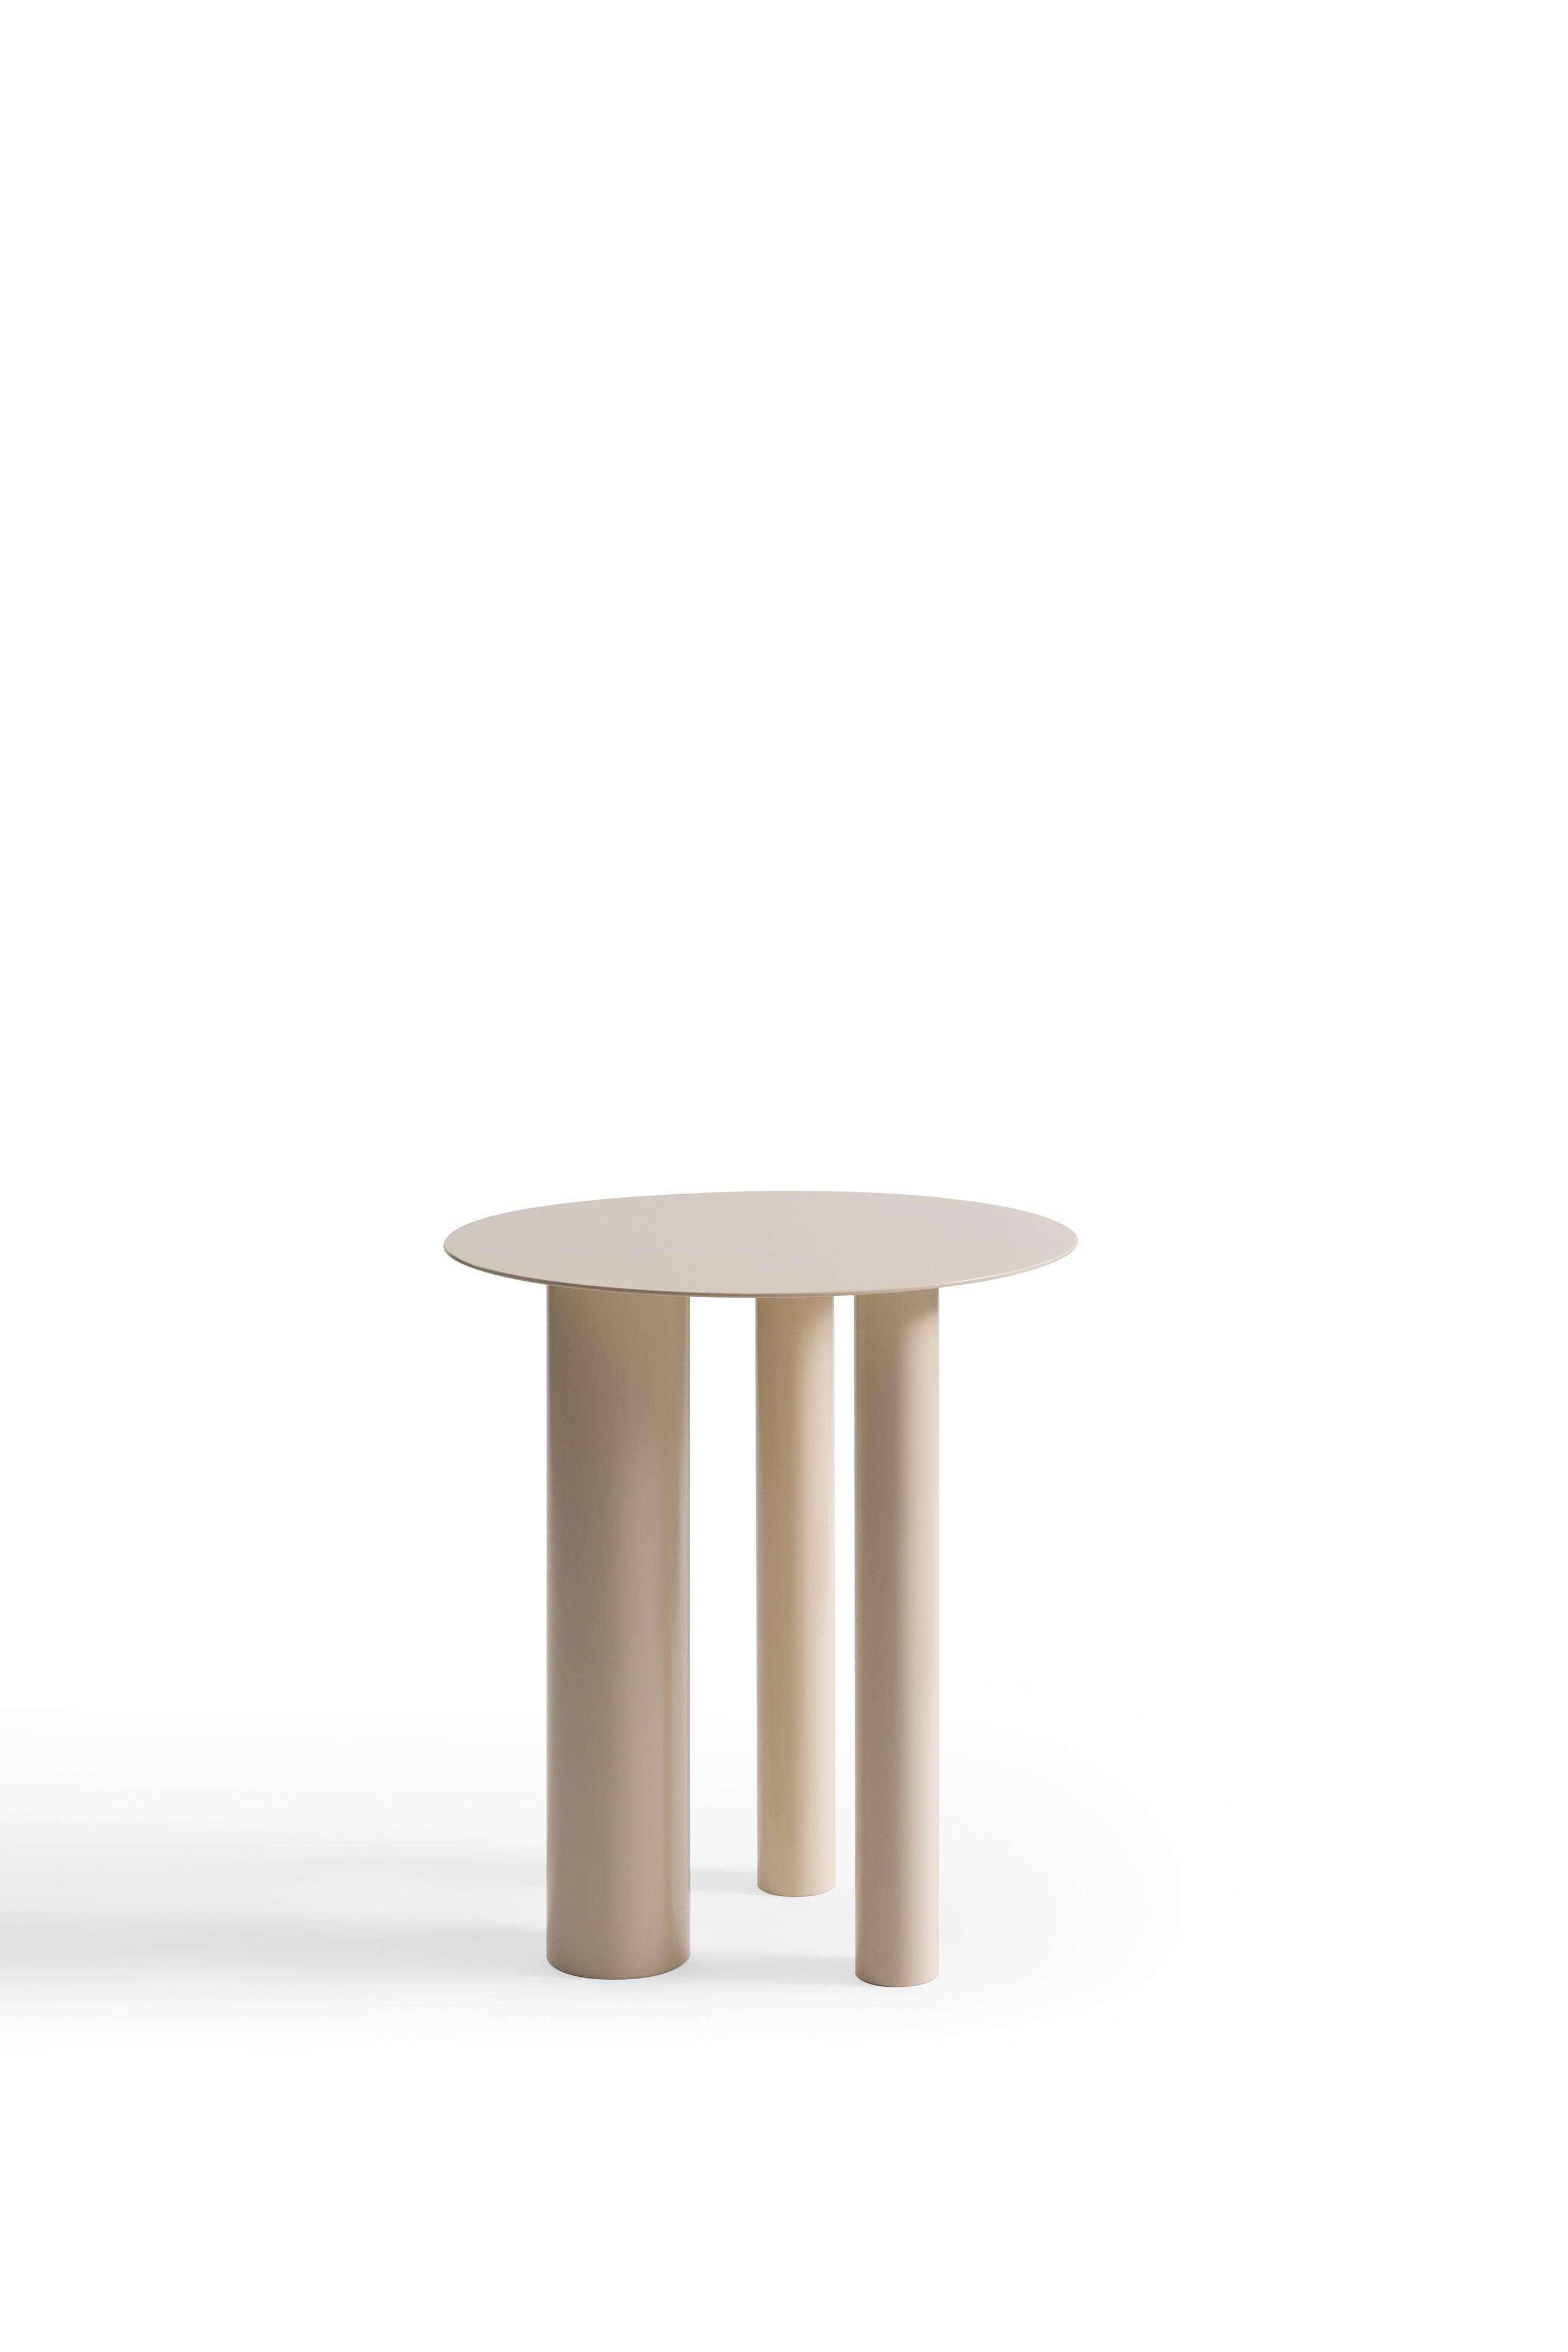 Painted Contemporary Coffee or Side Table 'Brandt CS2' by Noom, White For Sale